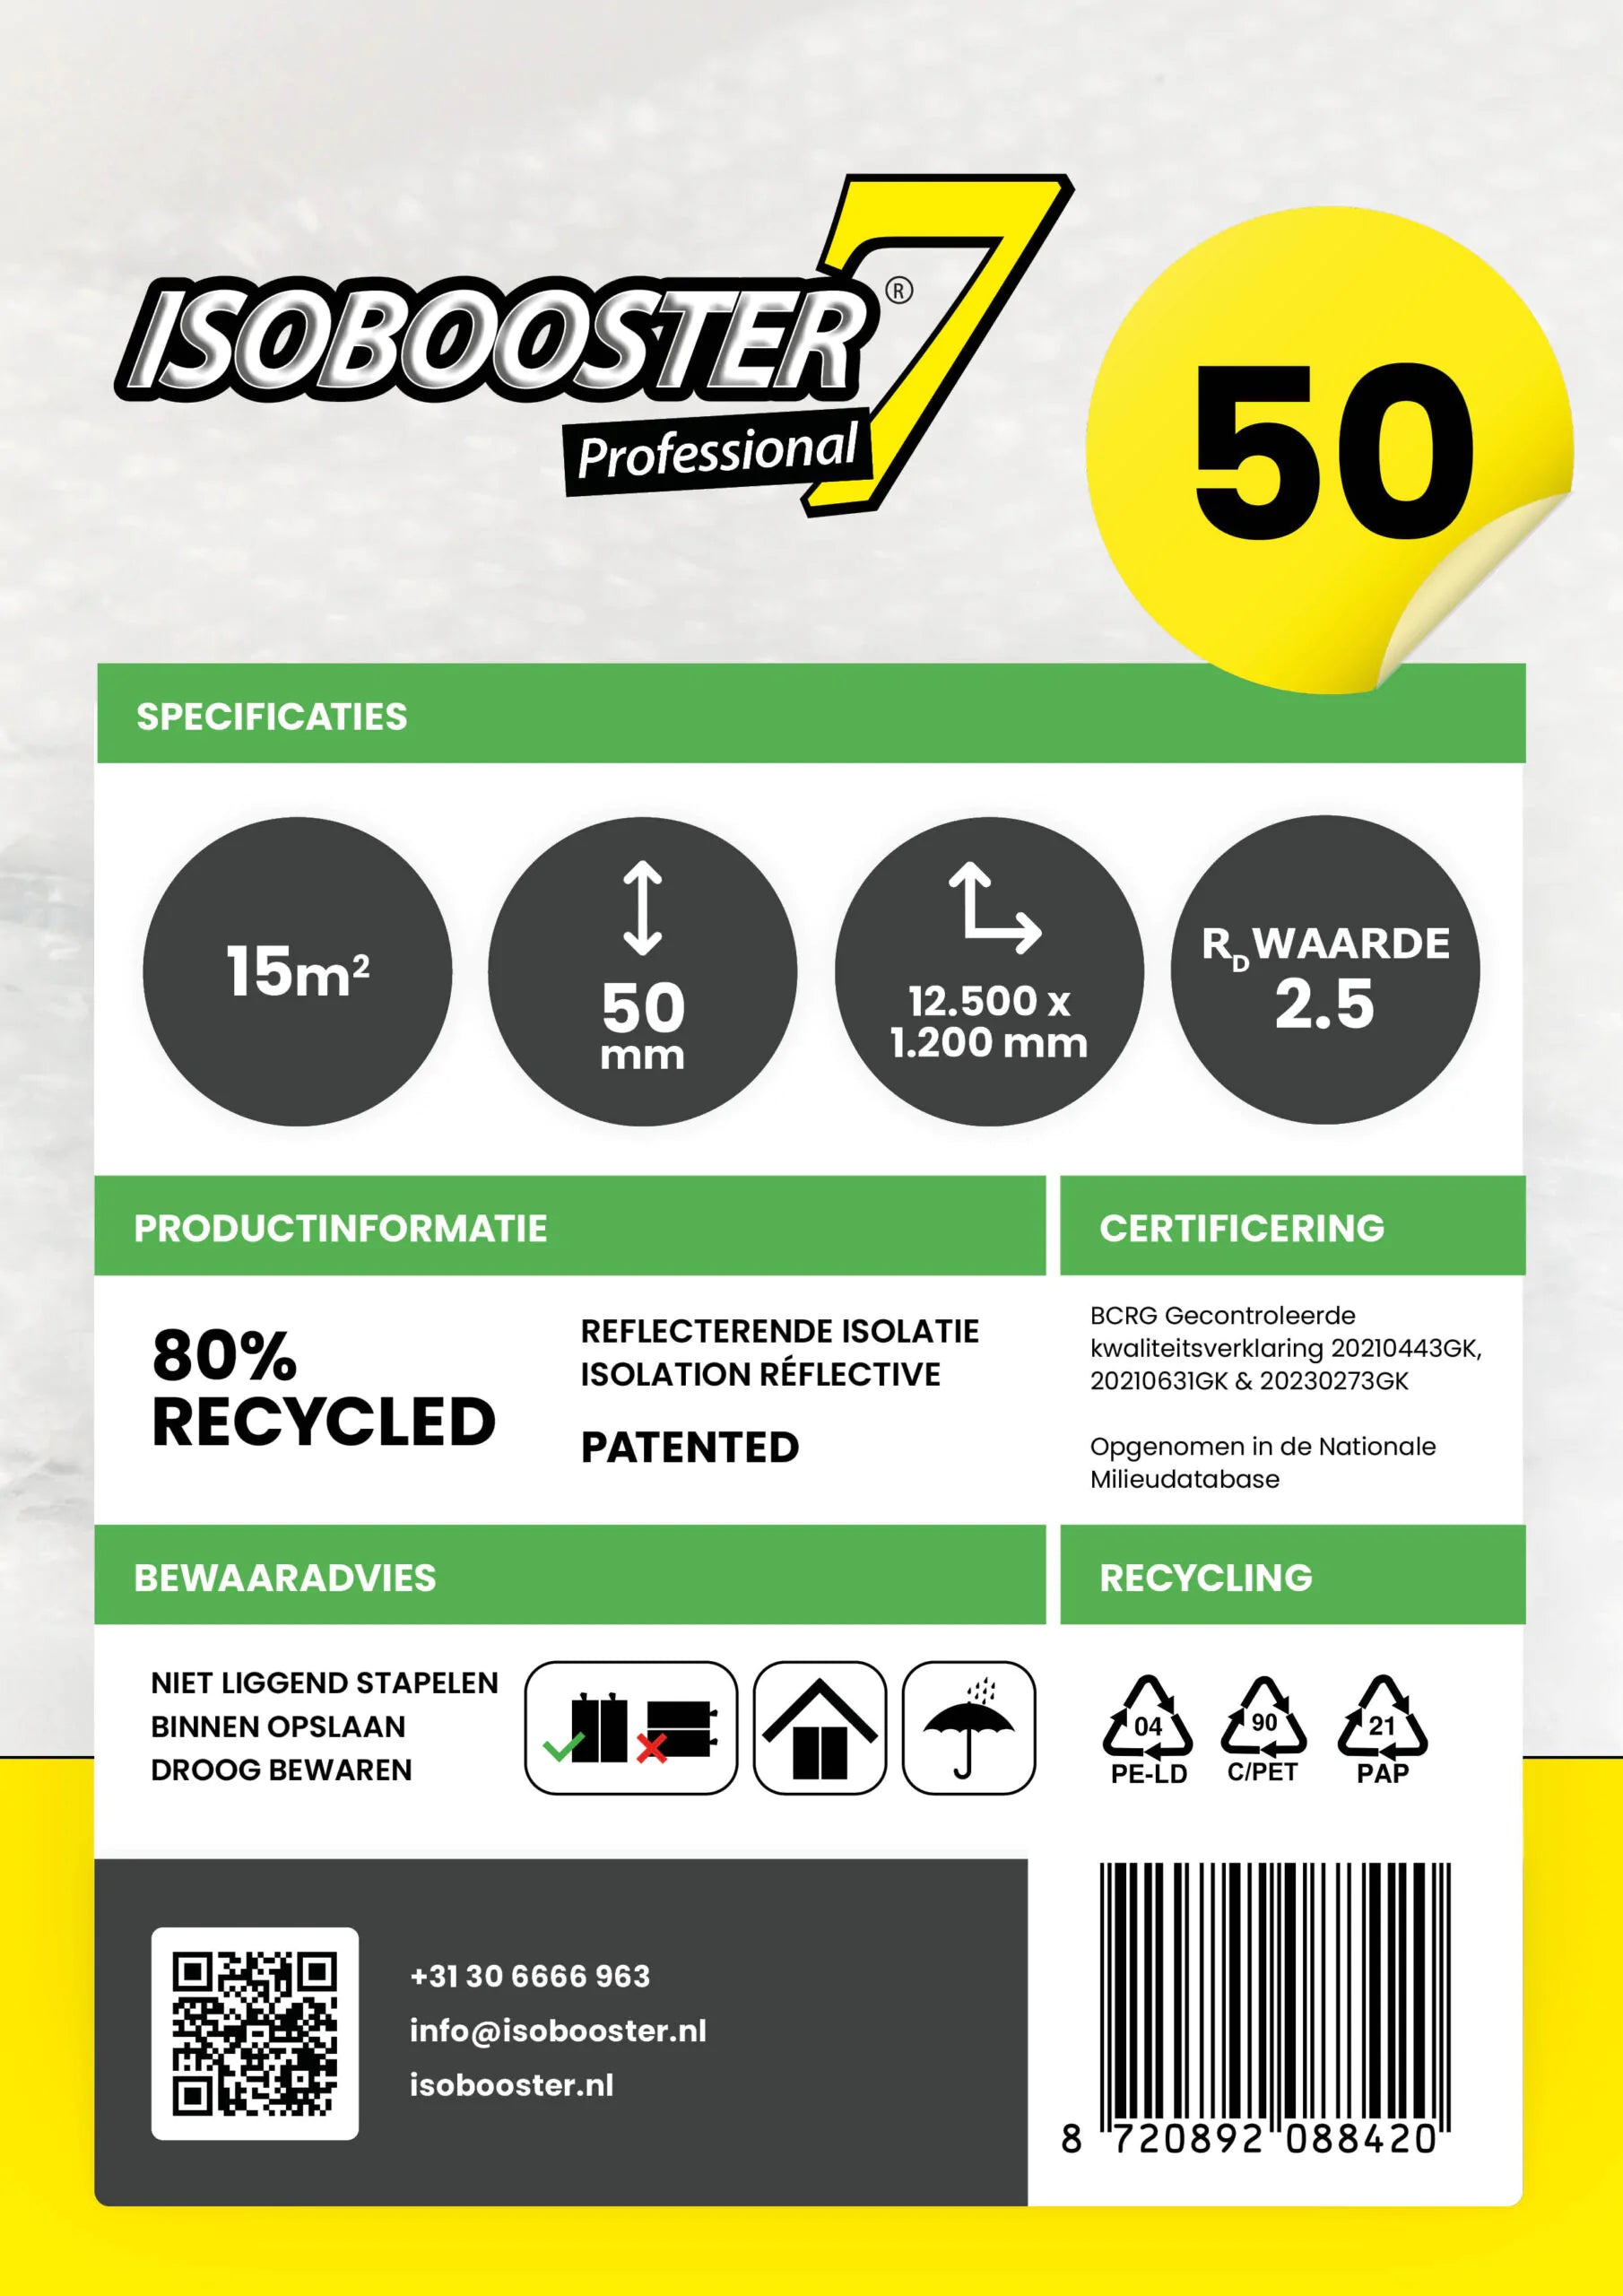 Isobooster Professionnel 50mm